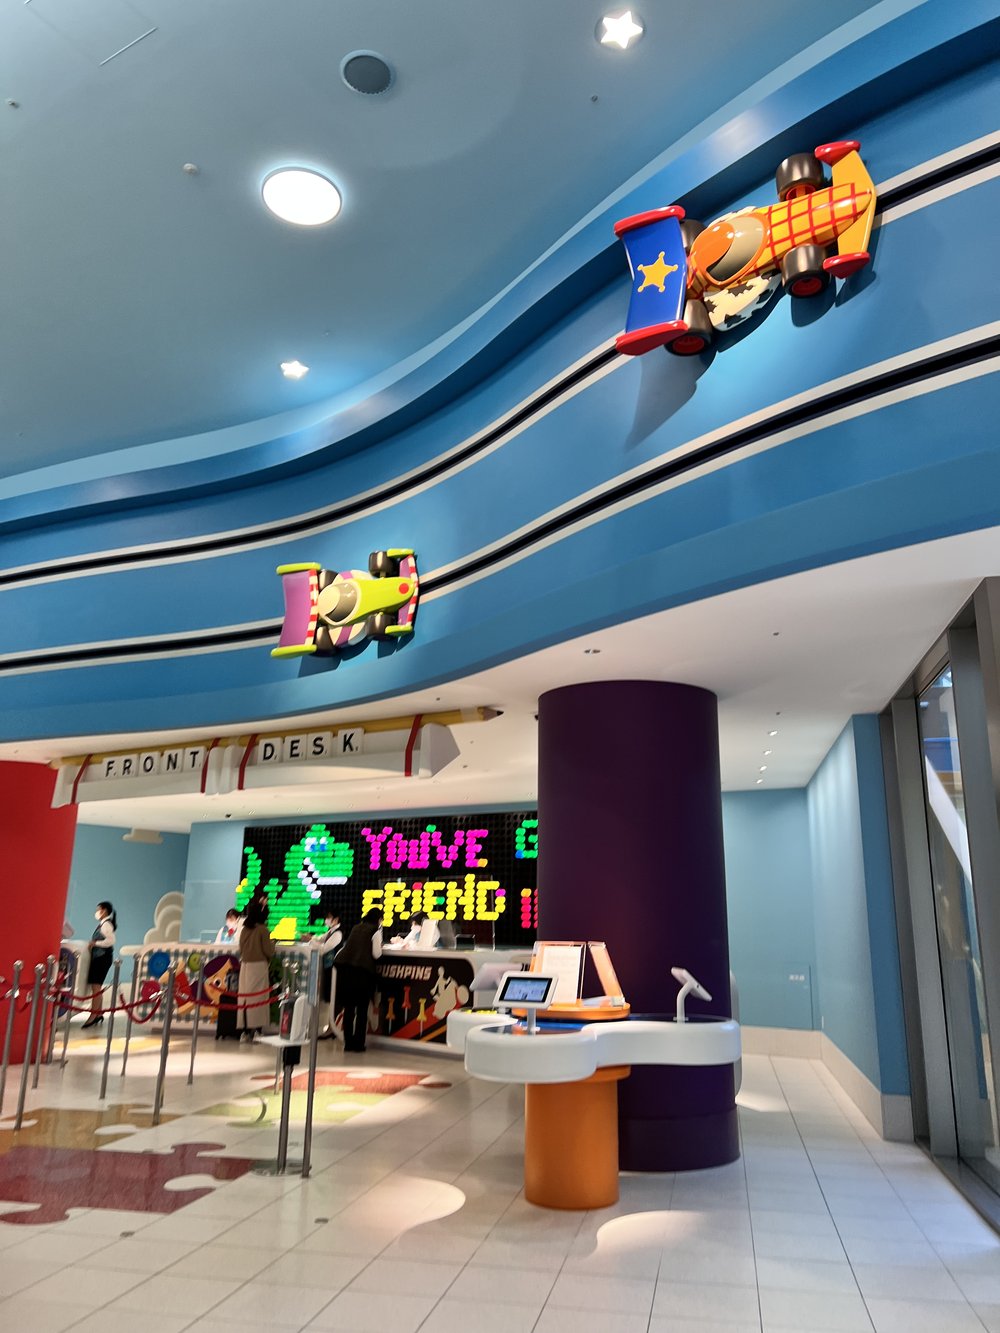  Toy race cars along the ceiling on tracks 